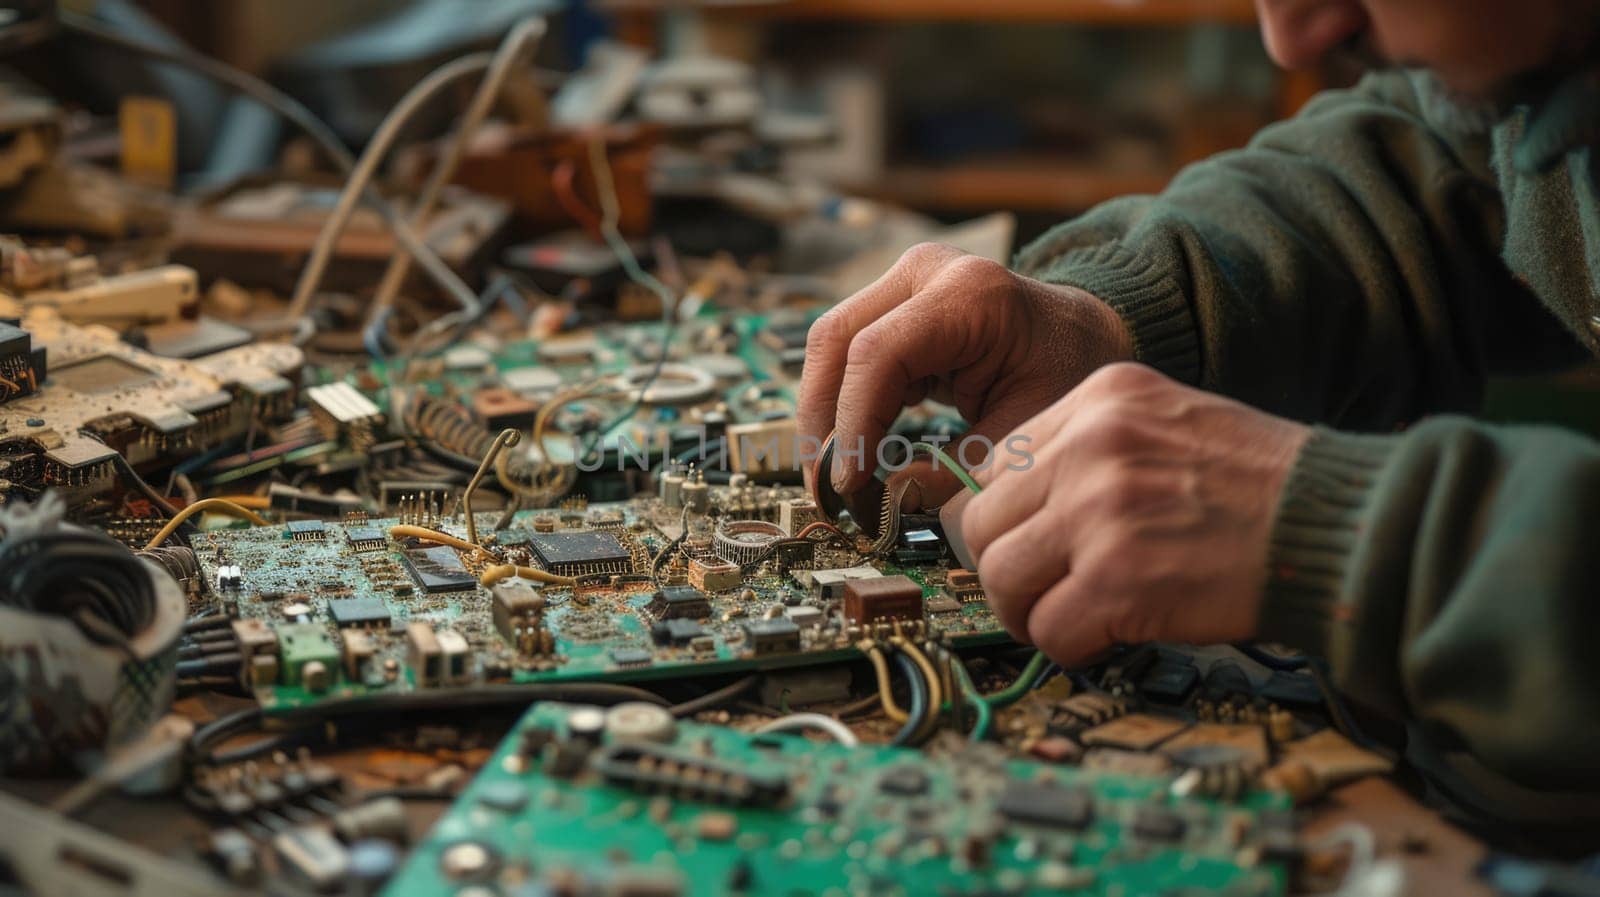 An engineer works on a motherboard in an urban workshop. AIG41 by biancoblue